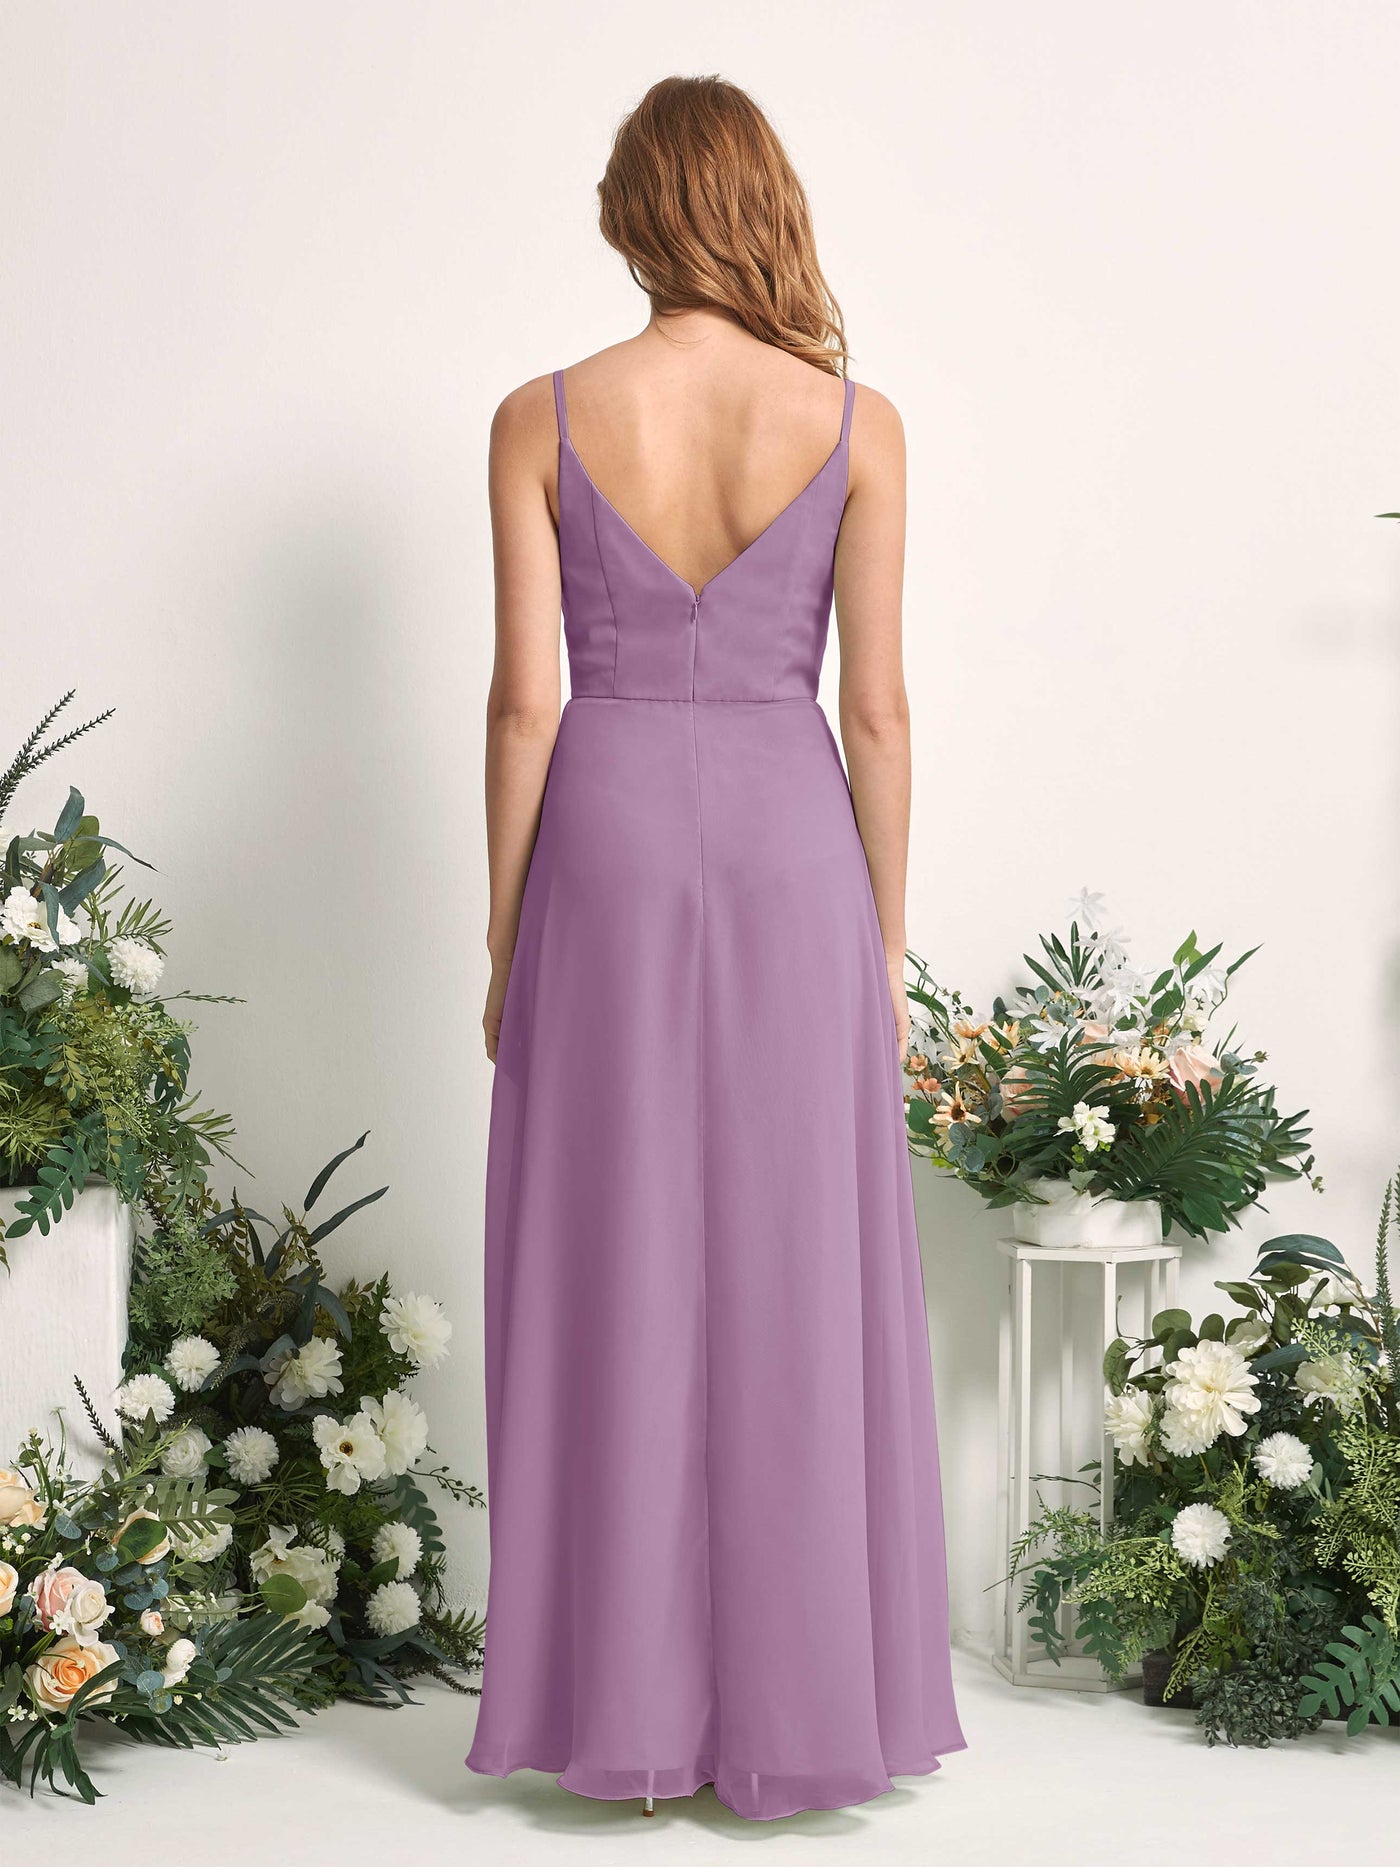 Bridesmaid Dress A-line Chiffon Spaghetti-straps Full Length Sleeveless Wedding Party Dress - Orchid Mist (81227221)#color_orchid-mist